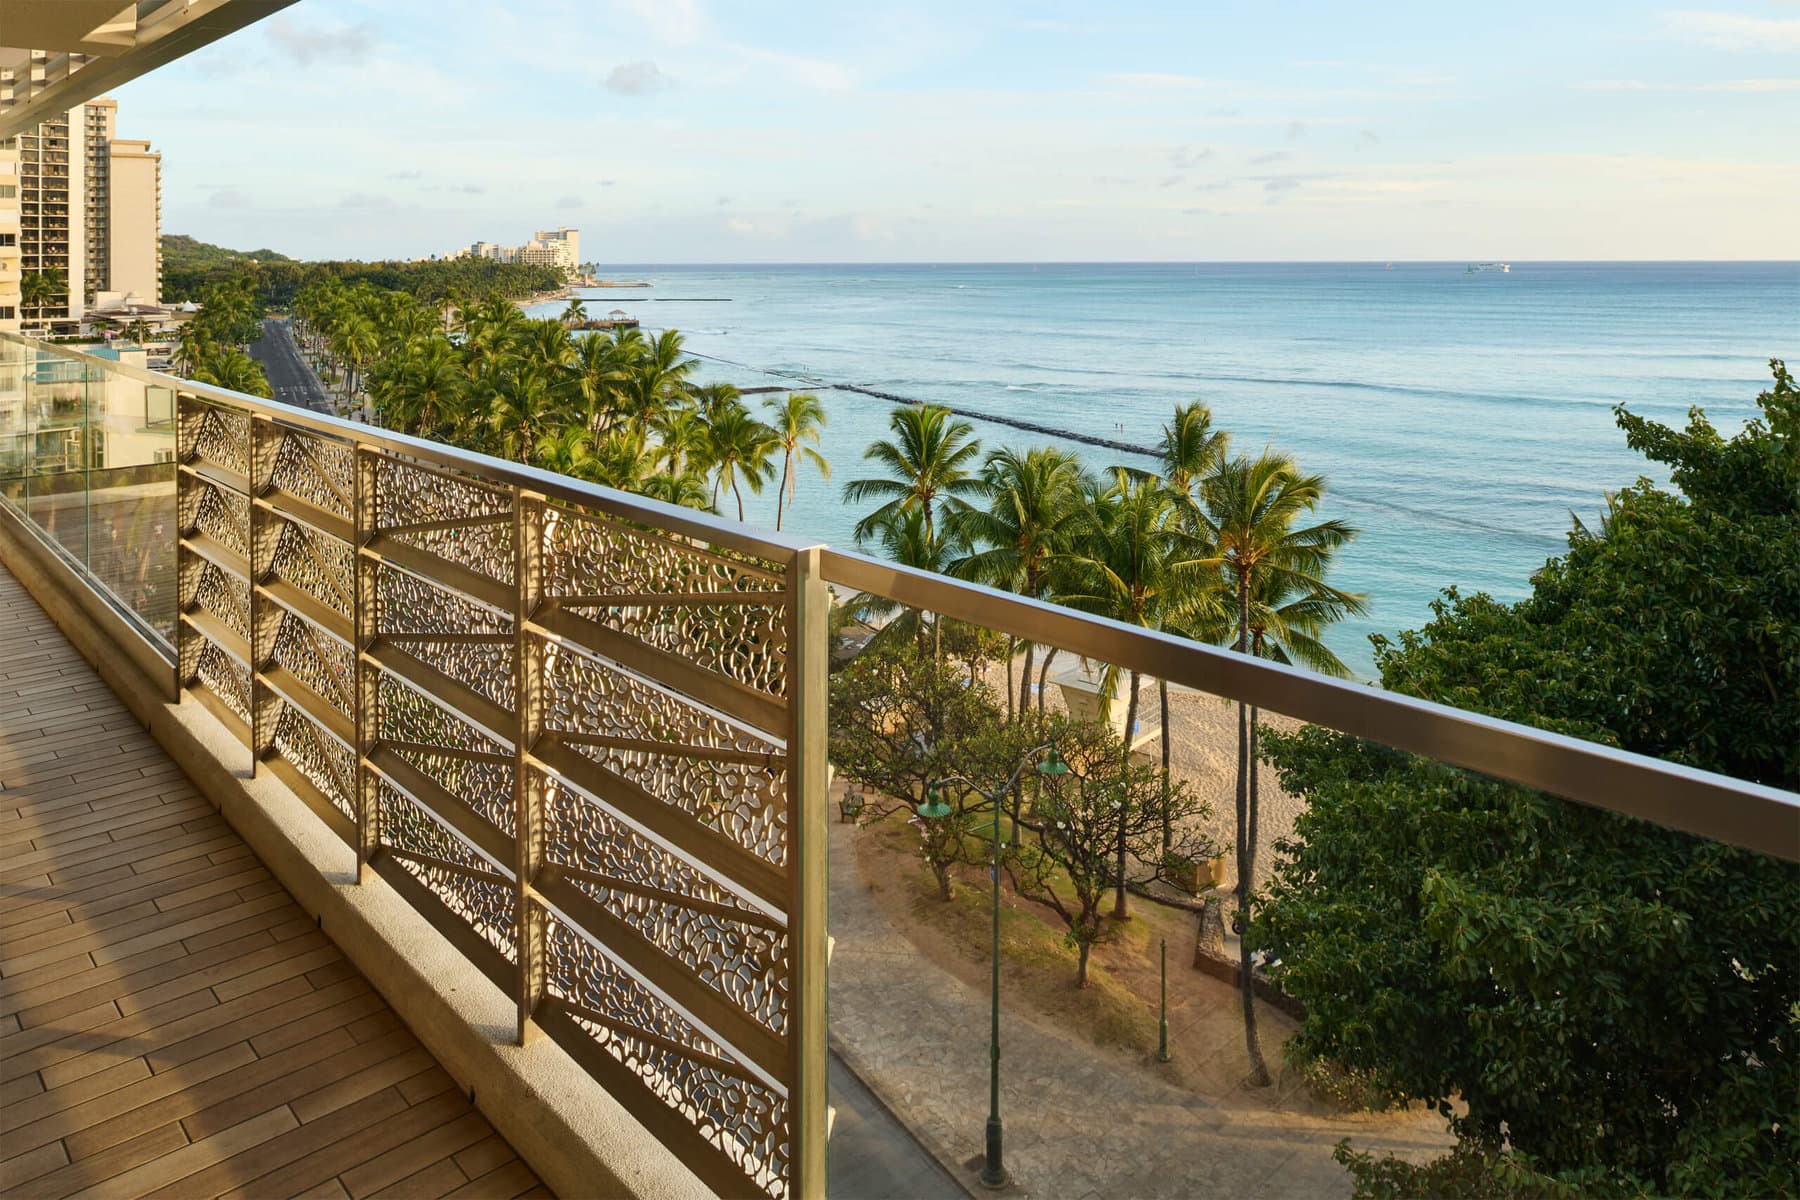 View of Waikiki Beach and the ocean from the Jade Suite balcony.